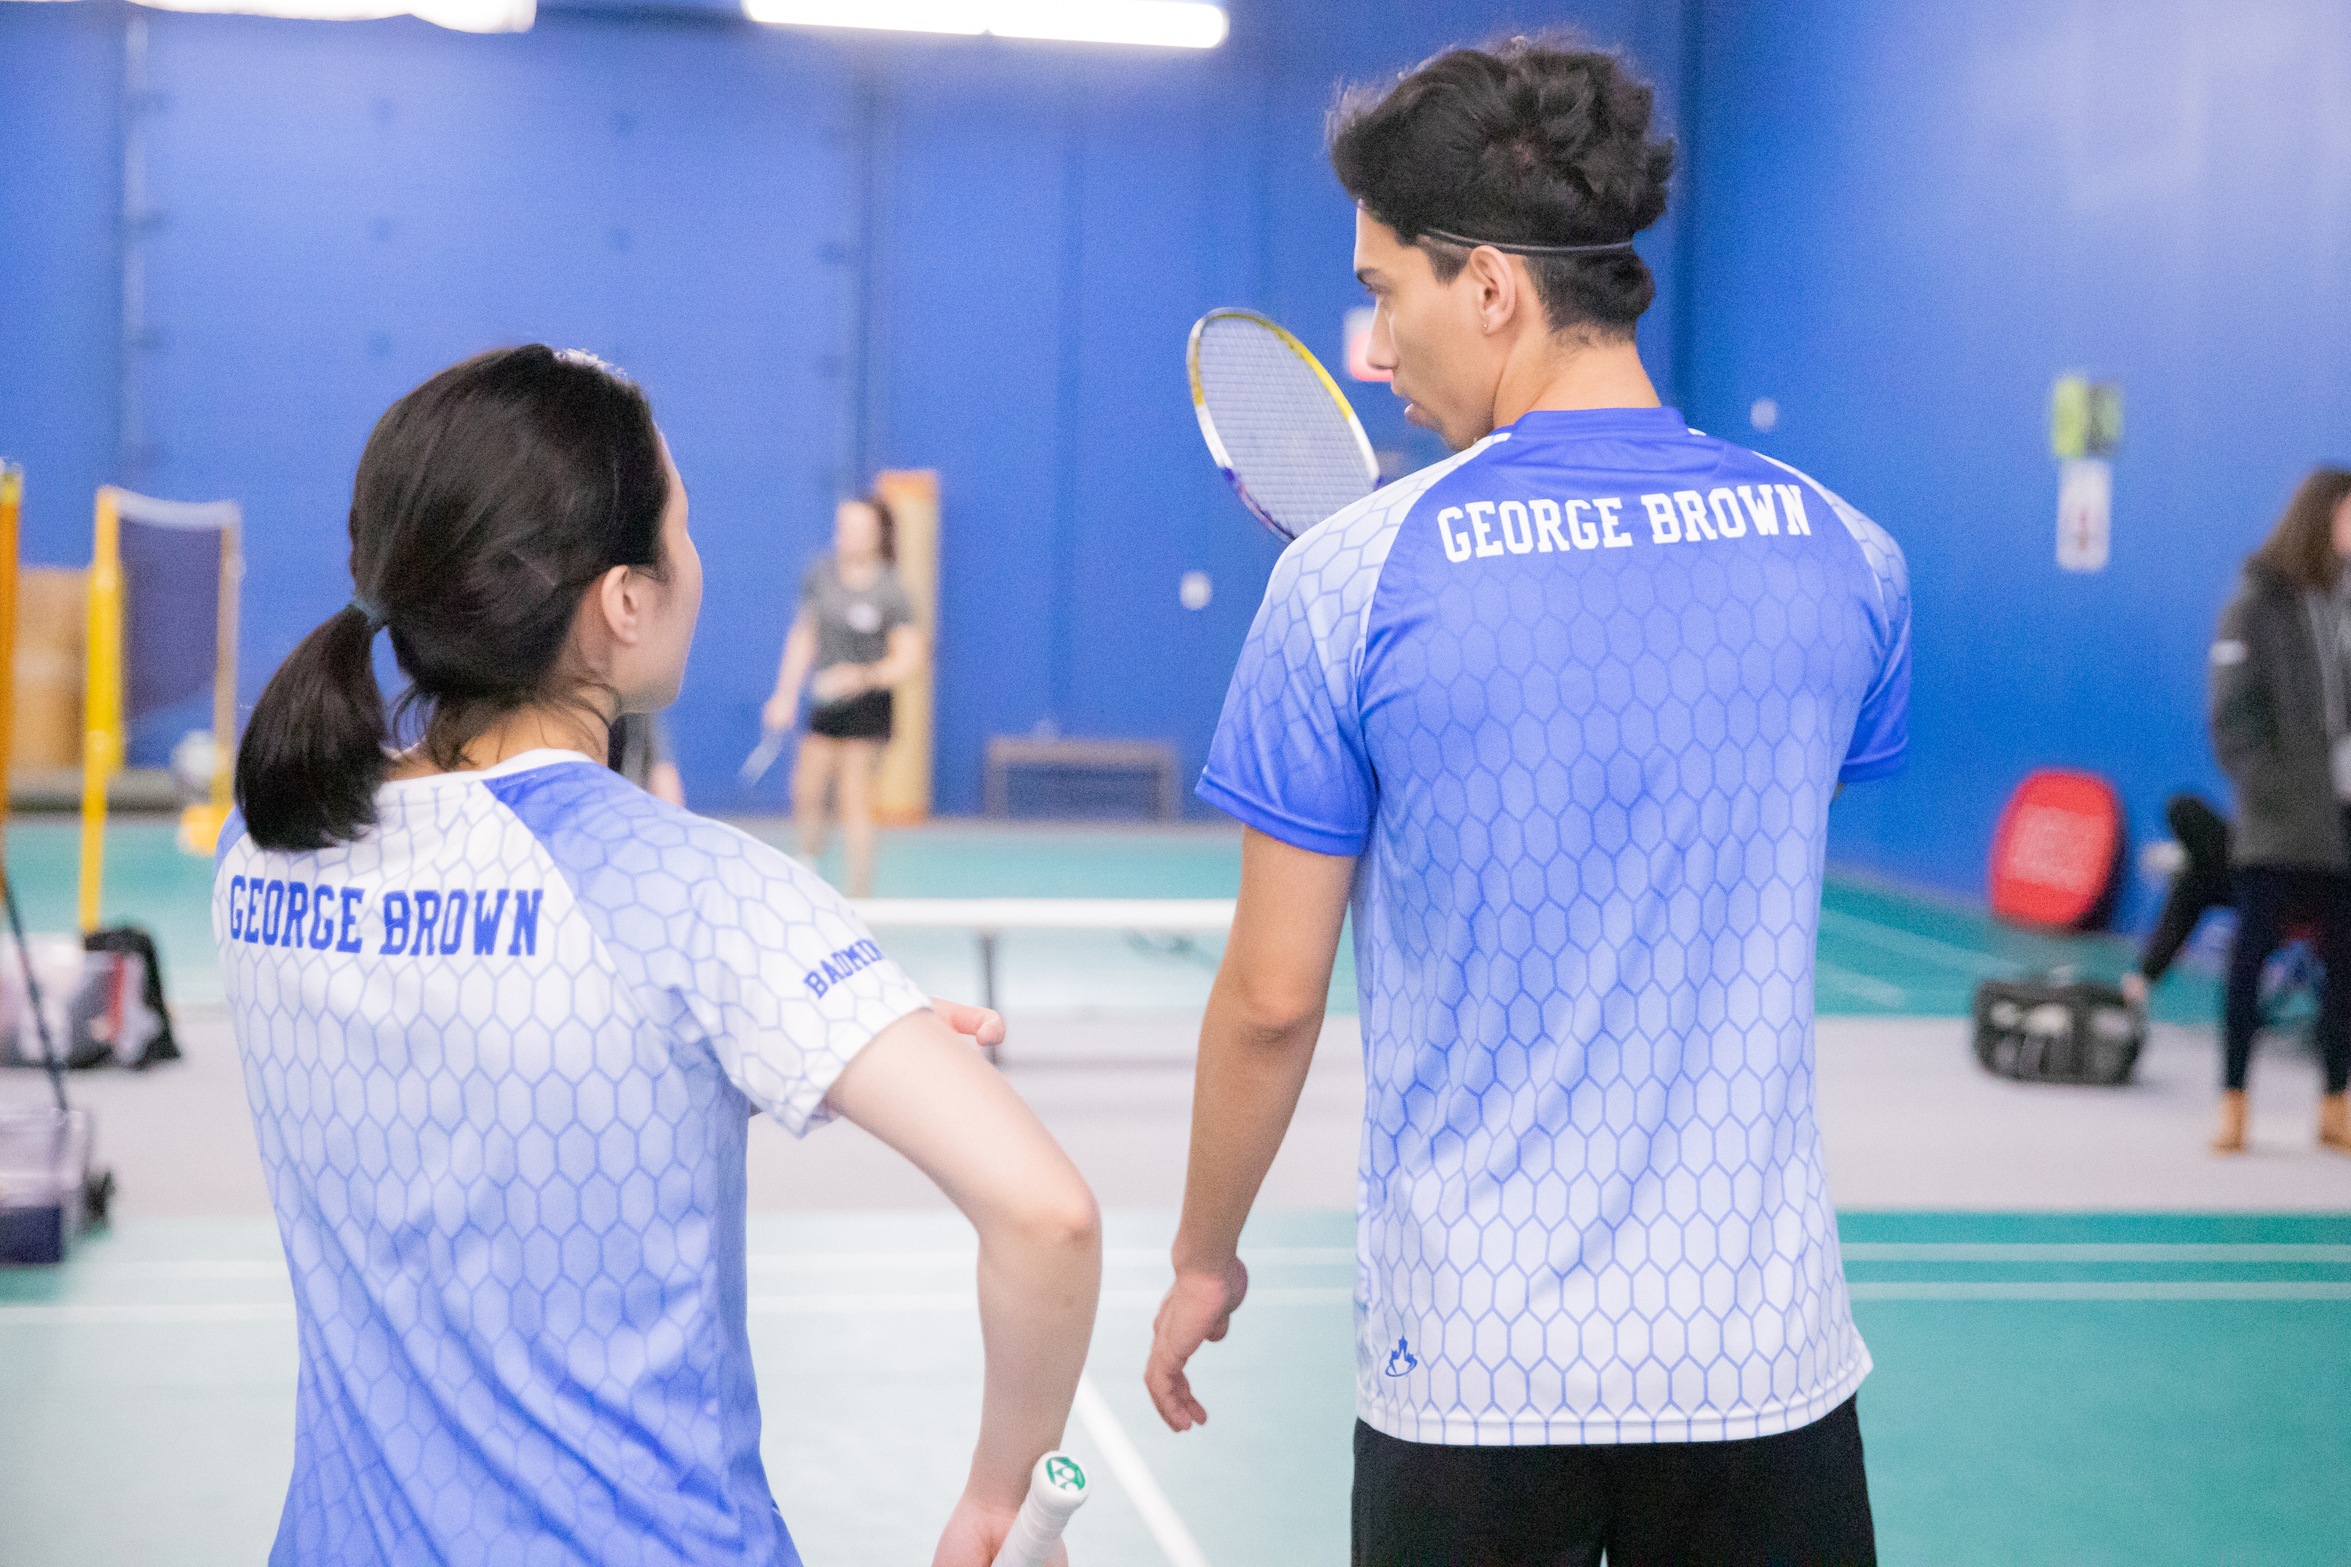 two badminton players talk to each other, viewed from behind